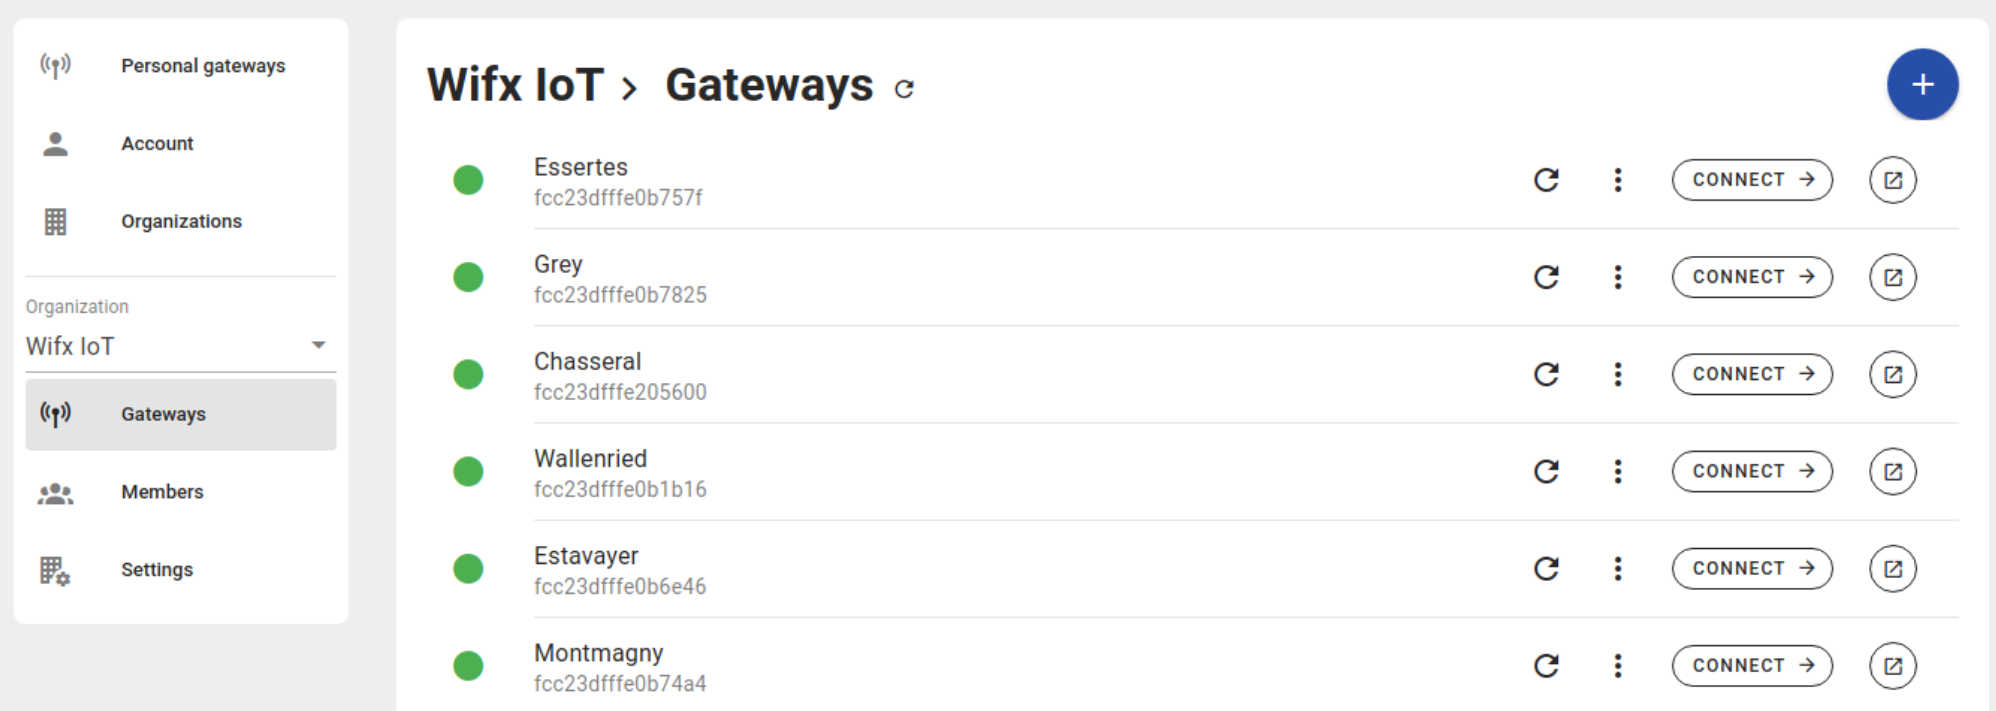 Example of a gateway list of an organization